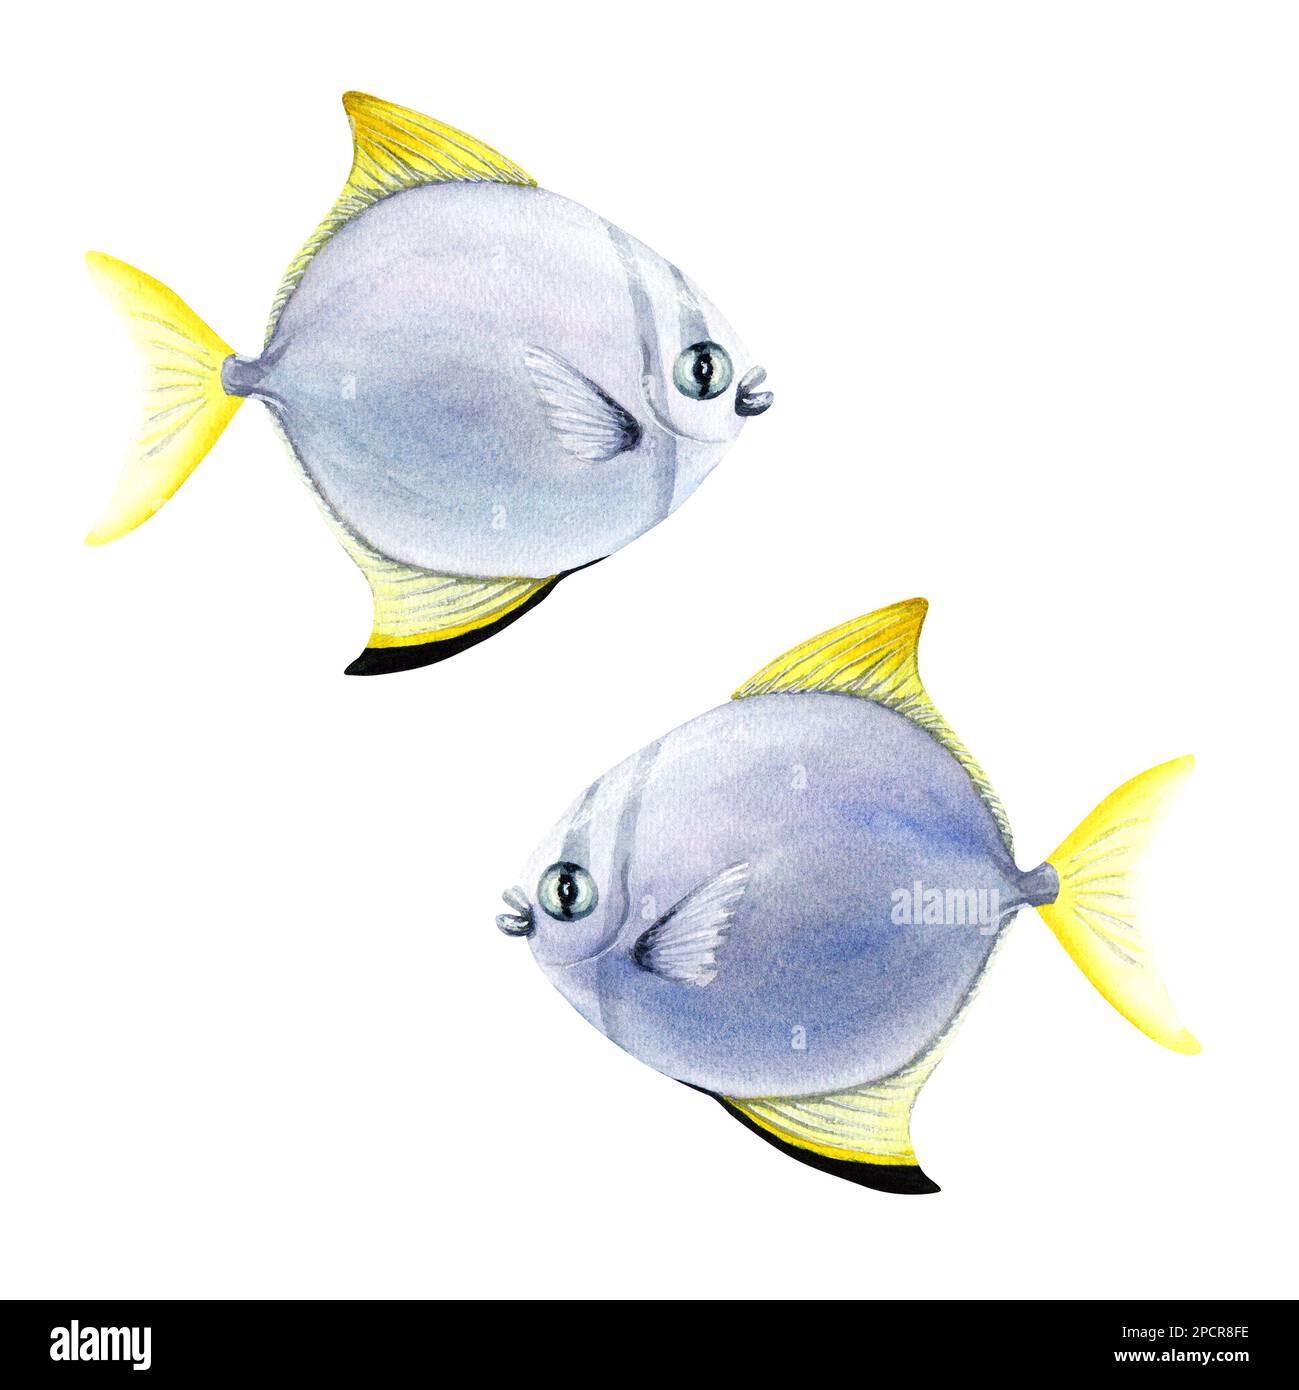 Silver moony coral reef fish. Watercolor illustration isolated on white background Stock Photo